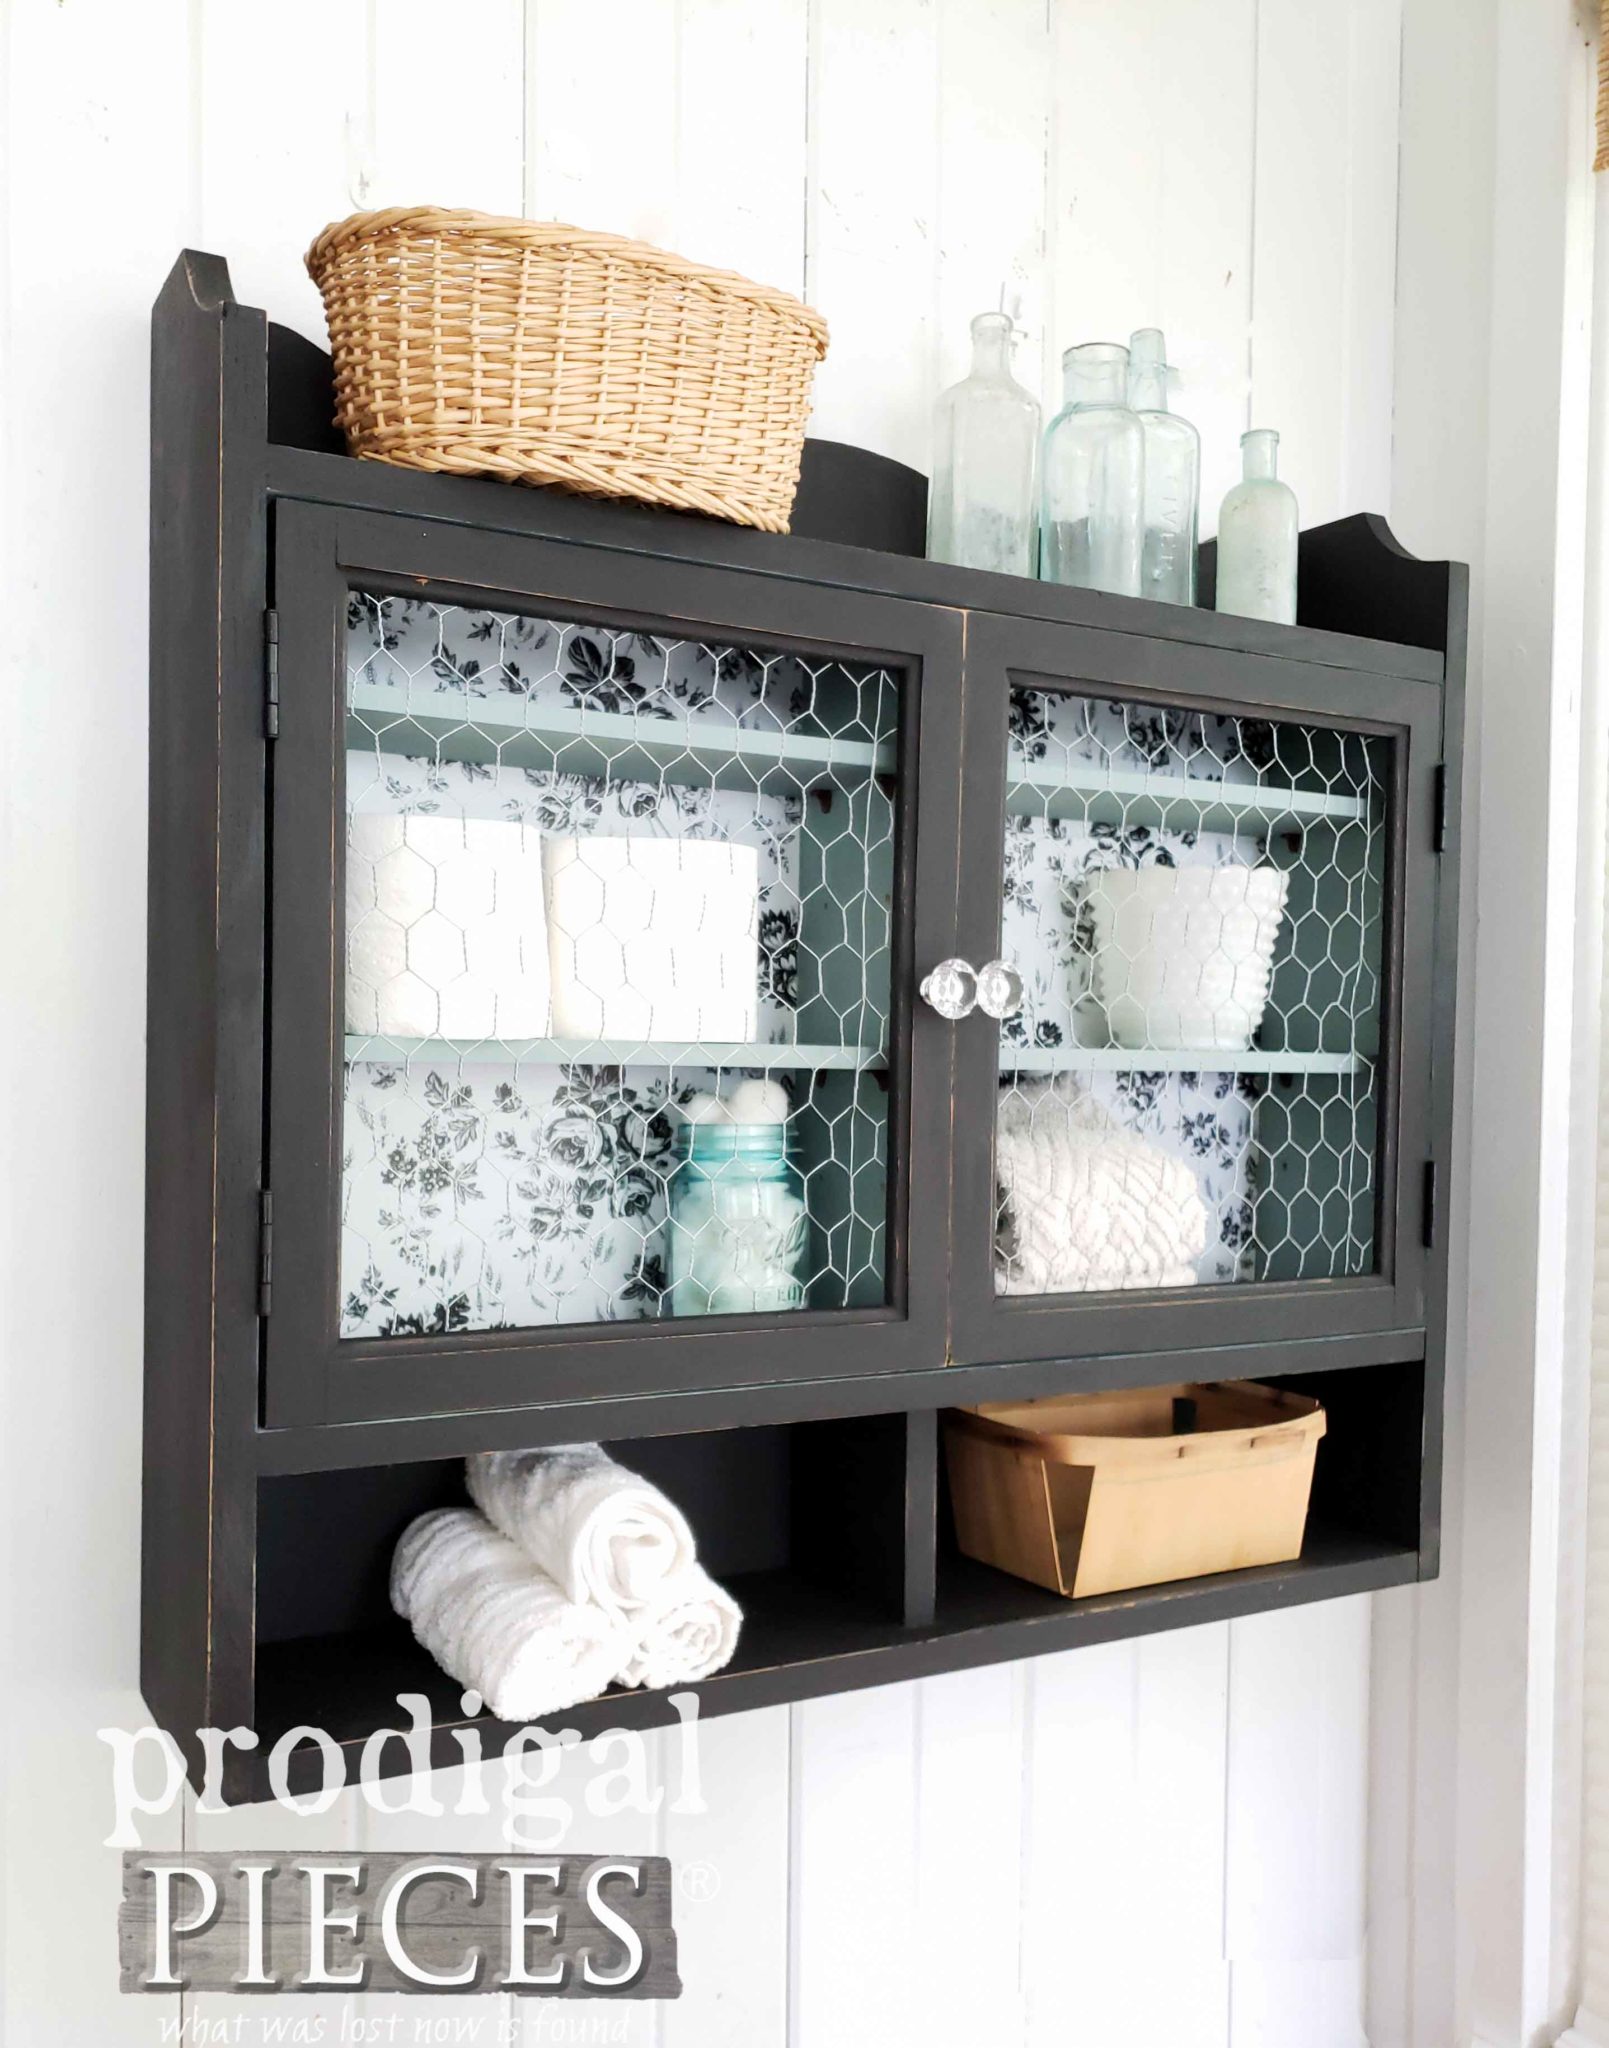 French Country Farmhouse Medicine Cabinet in Black by Larissa of Prodigal Pieces | prodigalpieces.com